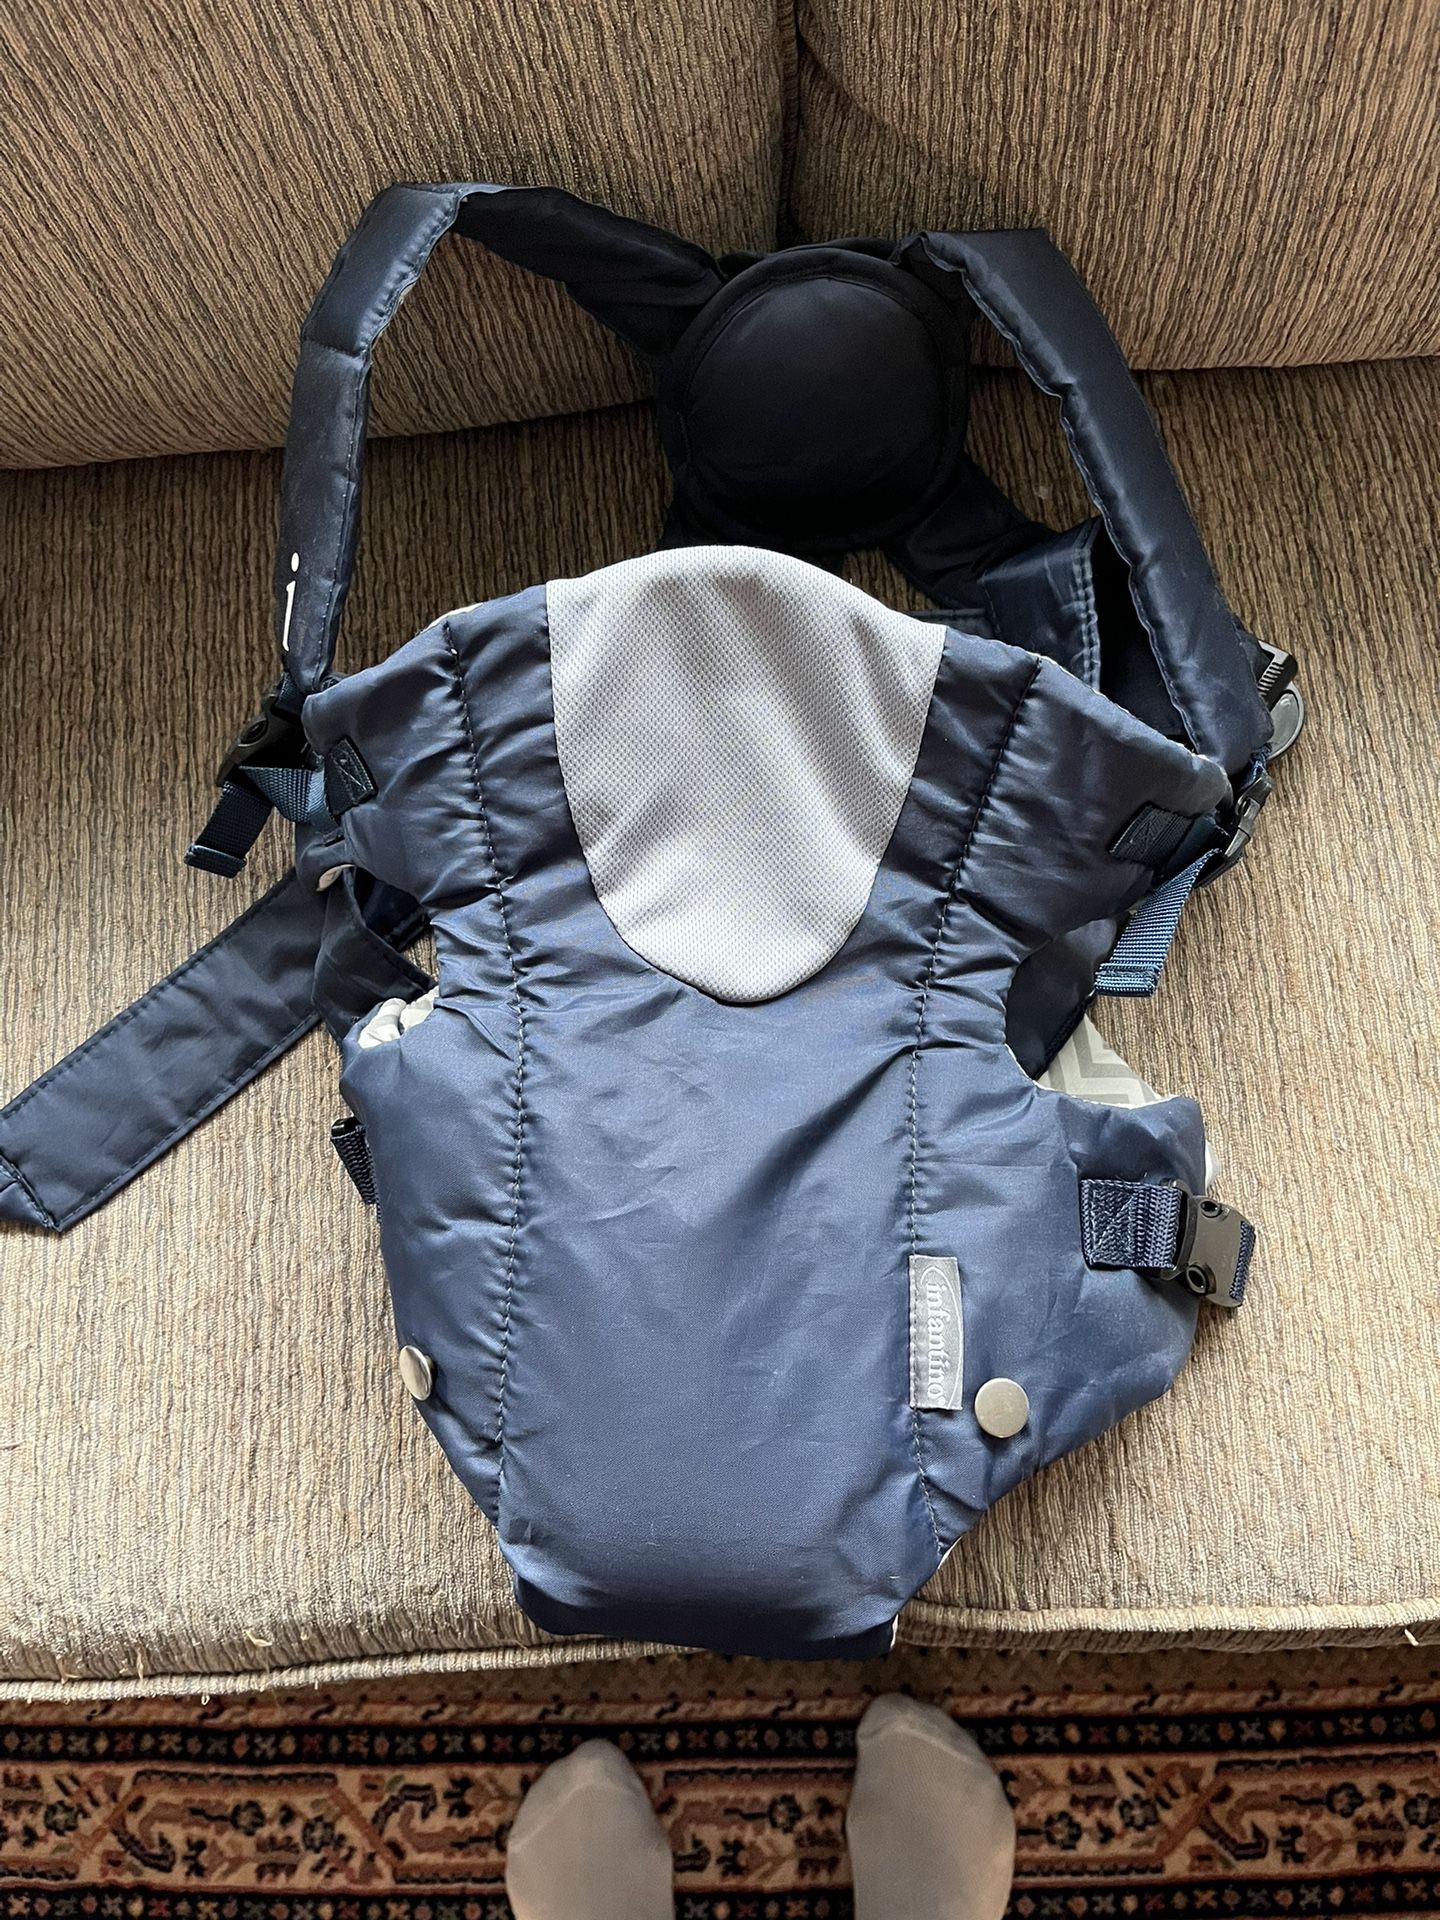 Infantino Adjustable baby Carrier